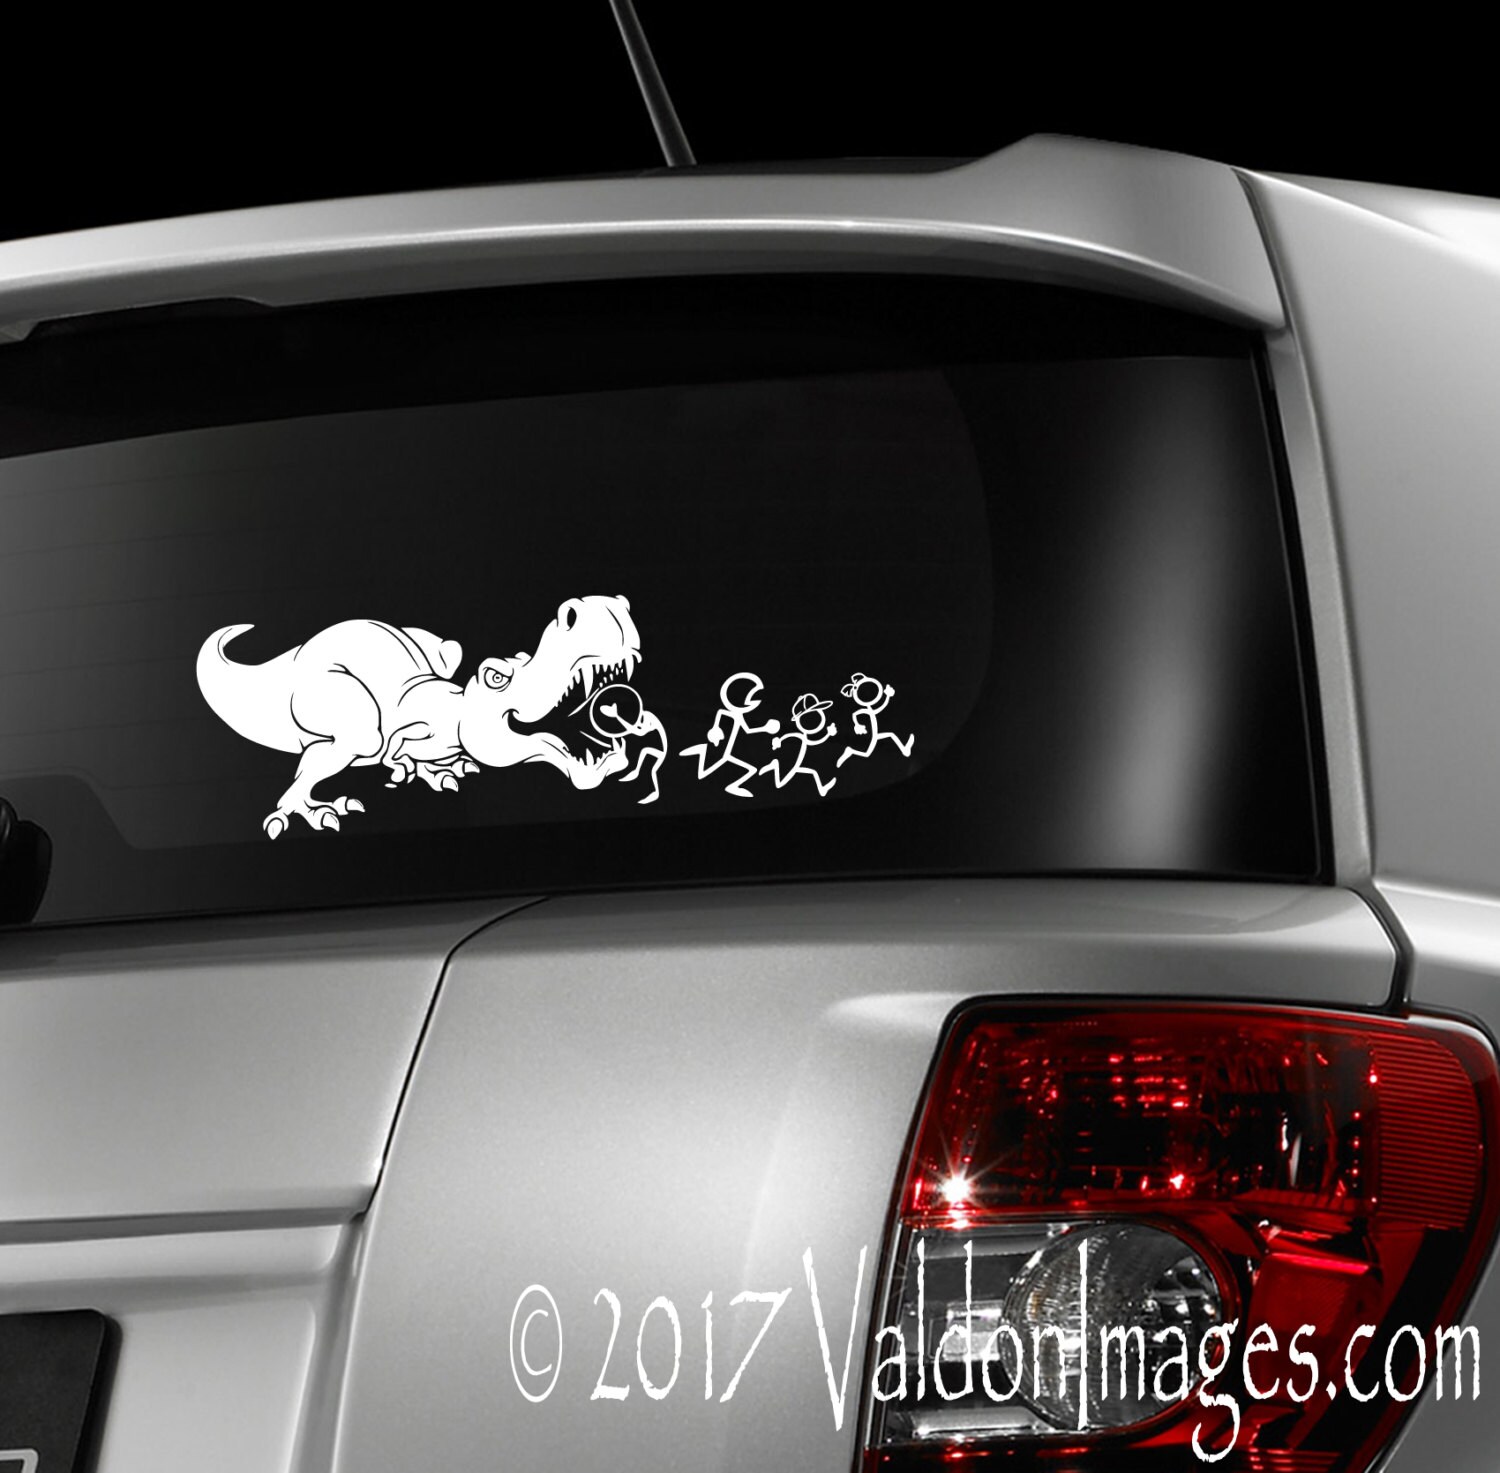 T-rex Eating Stick Family, Dinosaur Car Decal, Dinosaur Sticker, Car Decal  Dinosaurs, Laptop Decal, Stick Figure Family, Car Decals for Men 